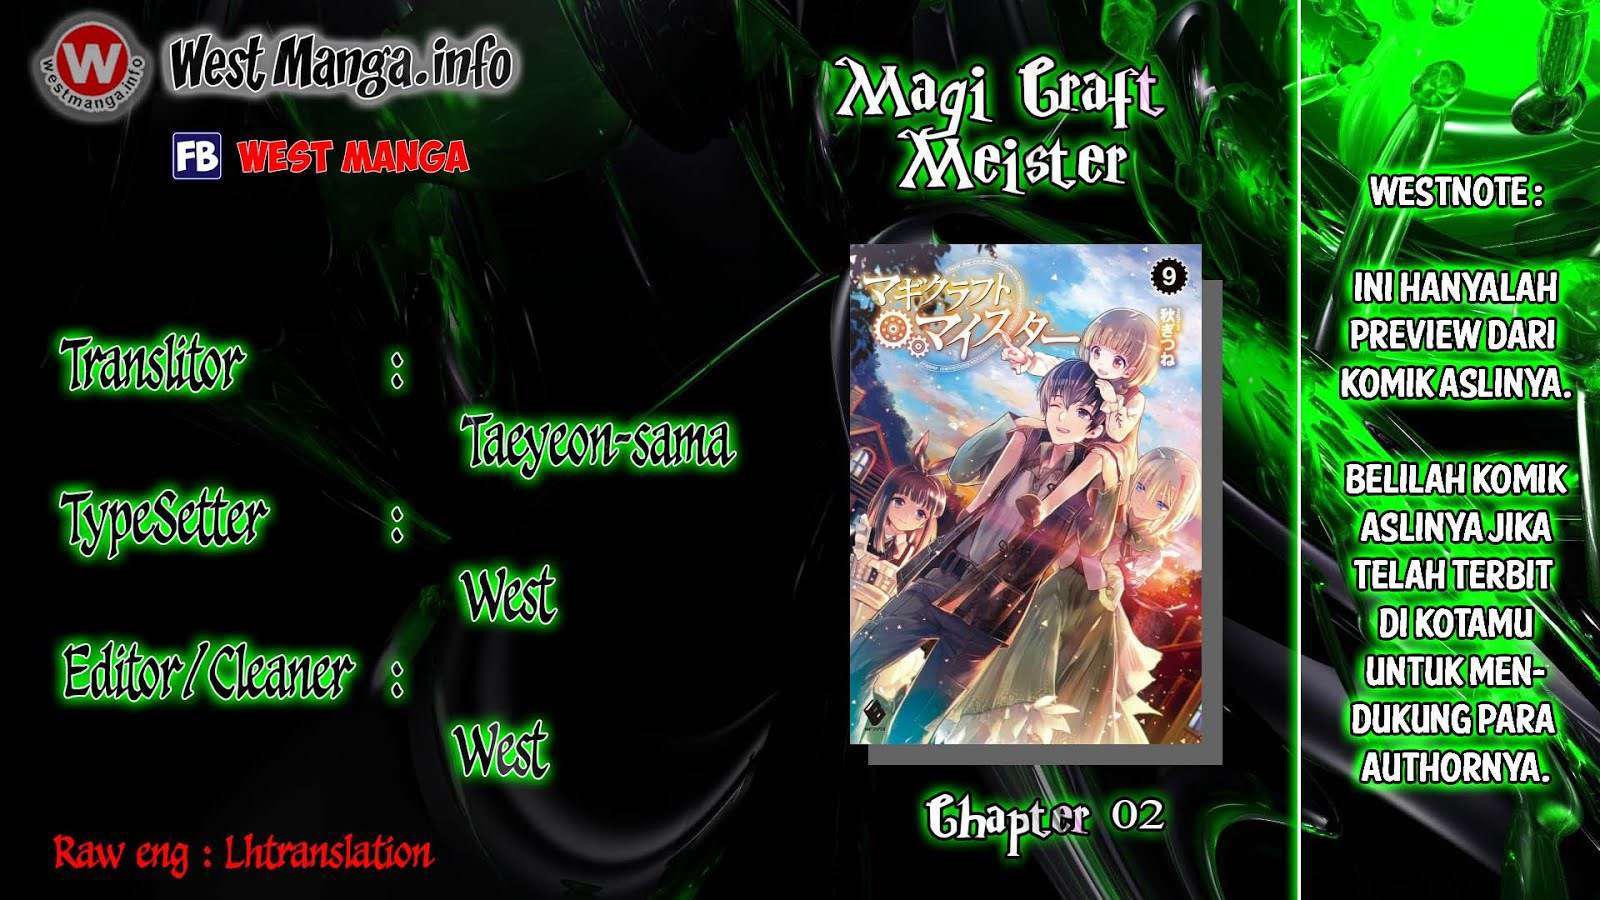 Magi Craft Meister  Chapter 02